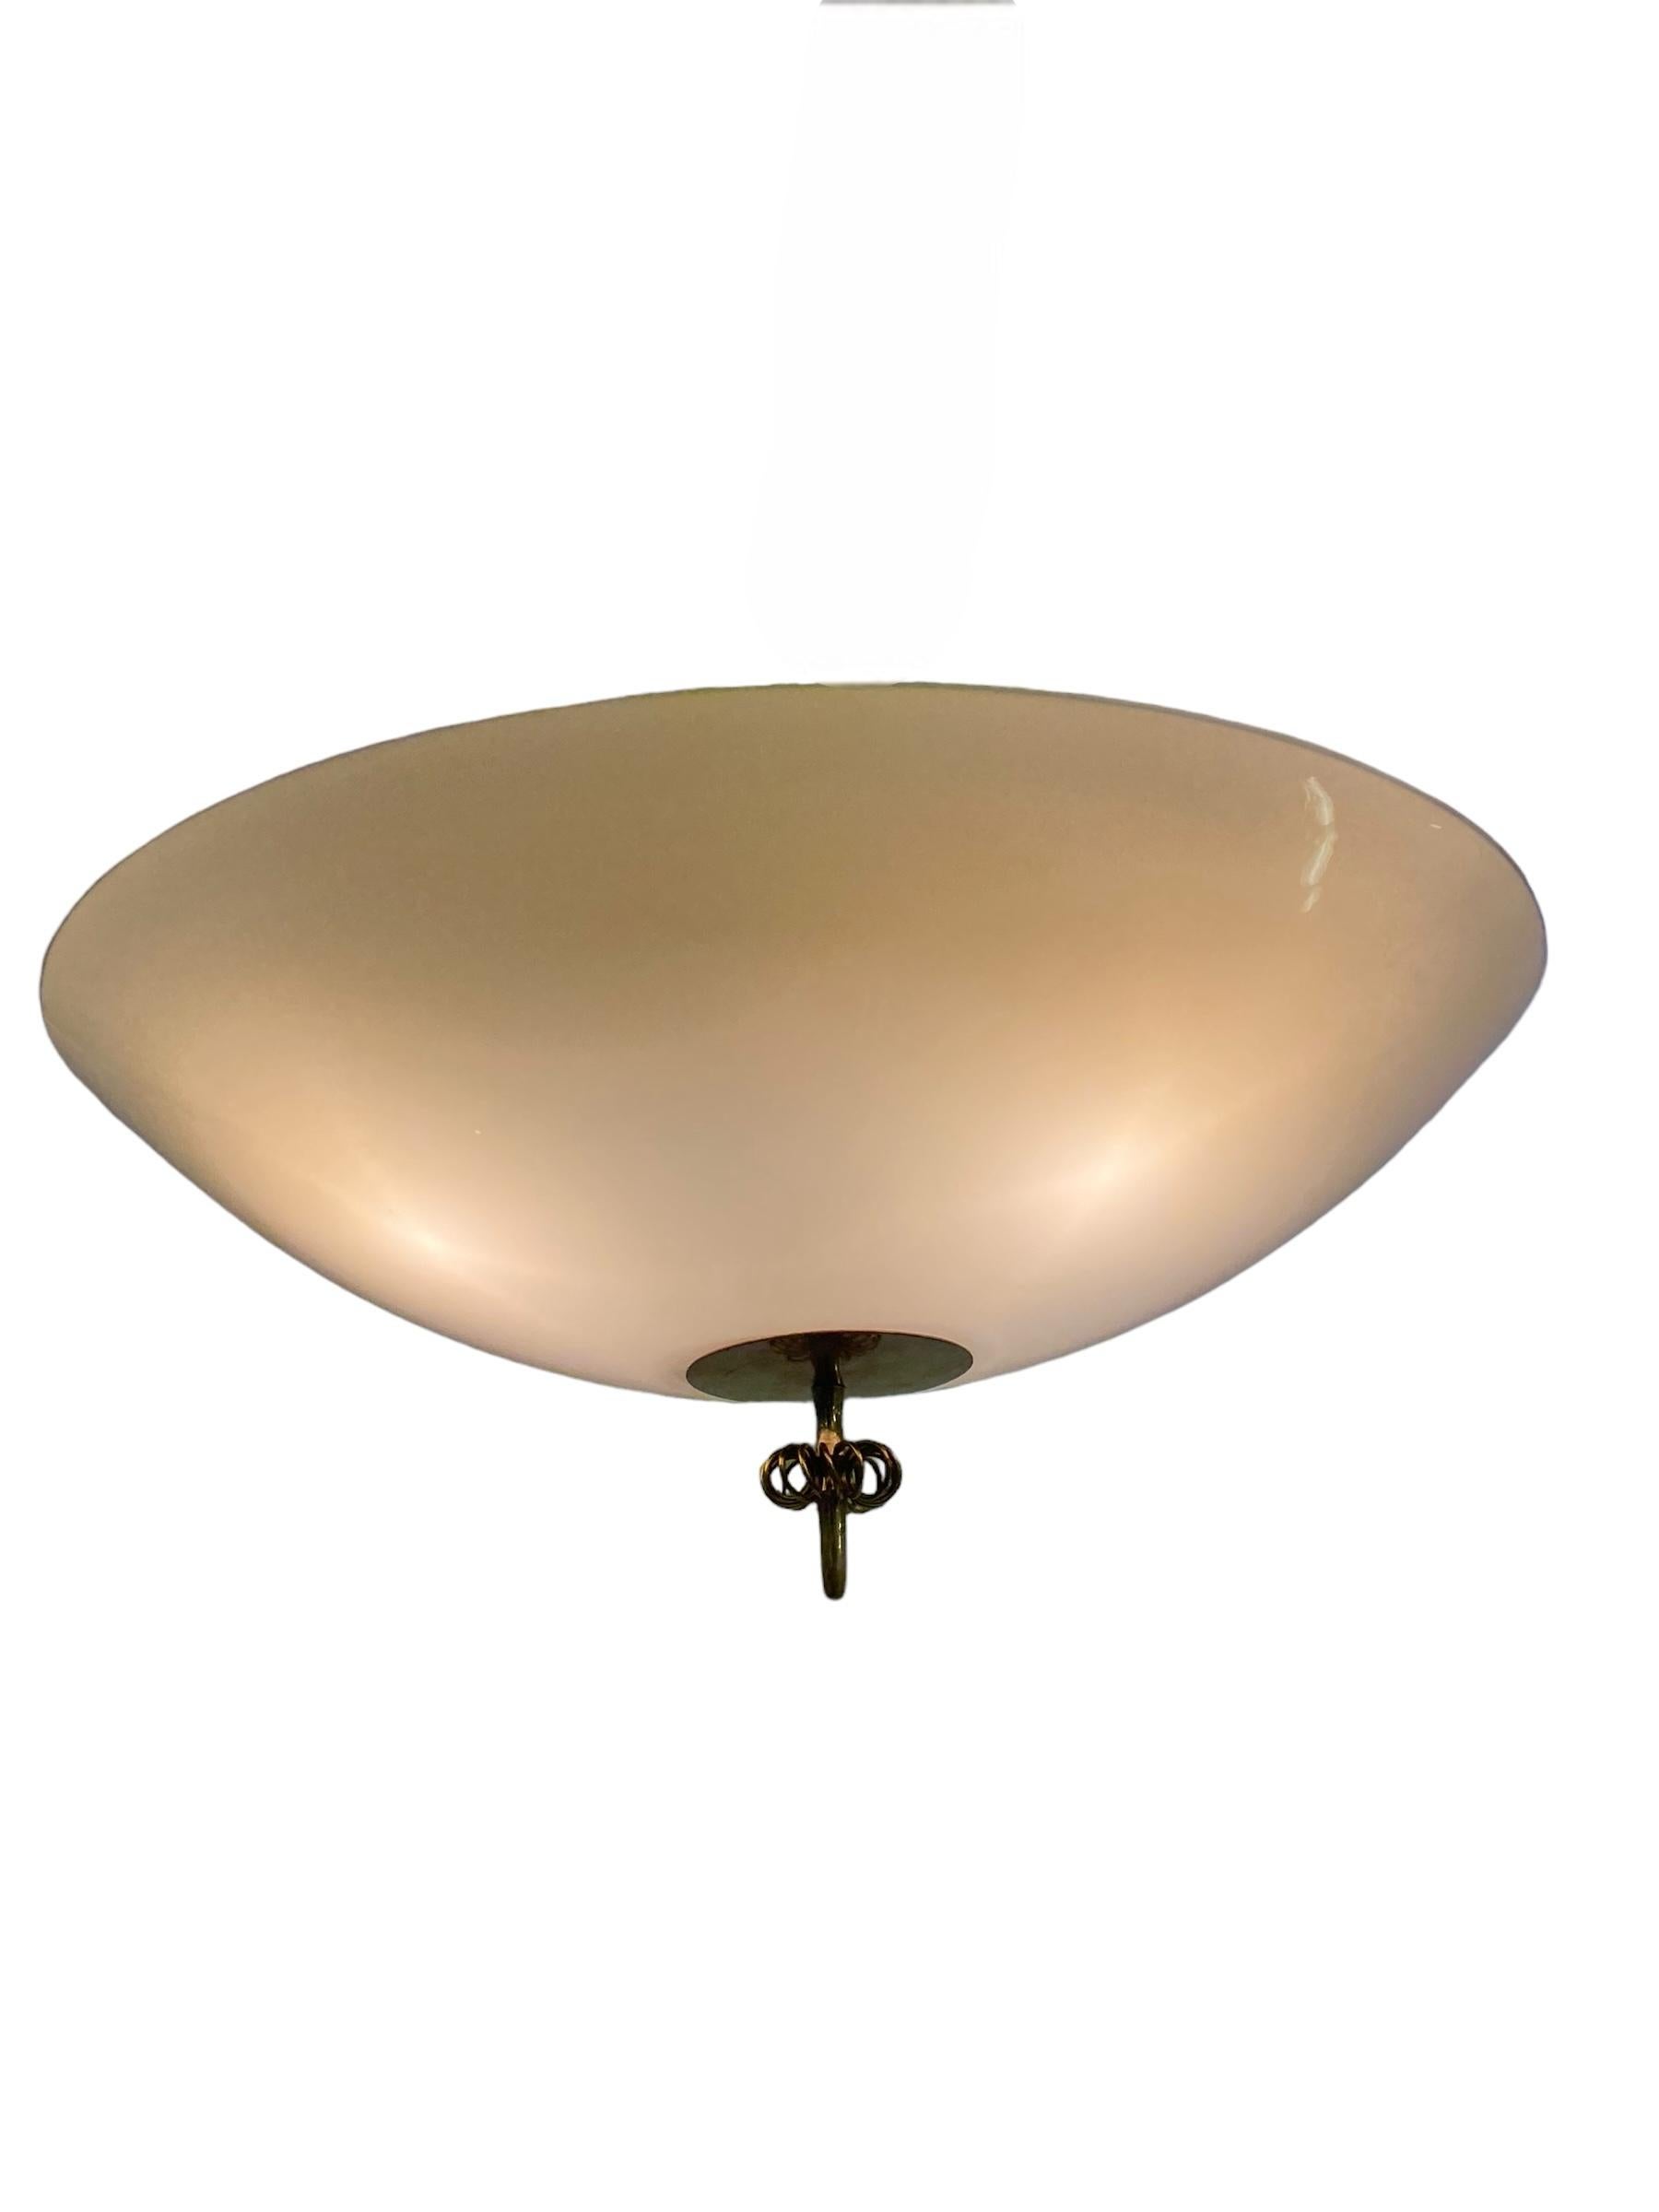 Finnish Paavo Tynell Ceiling Lamp/Flush Mount  Model Number 1088 For Idman, 1950s For Sale